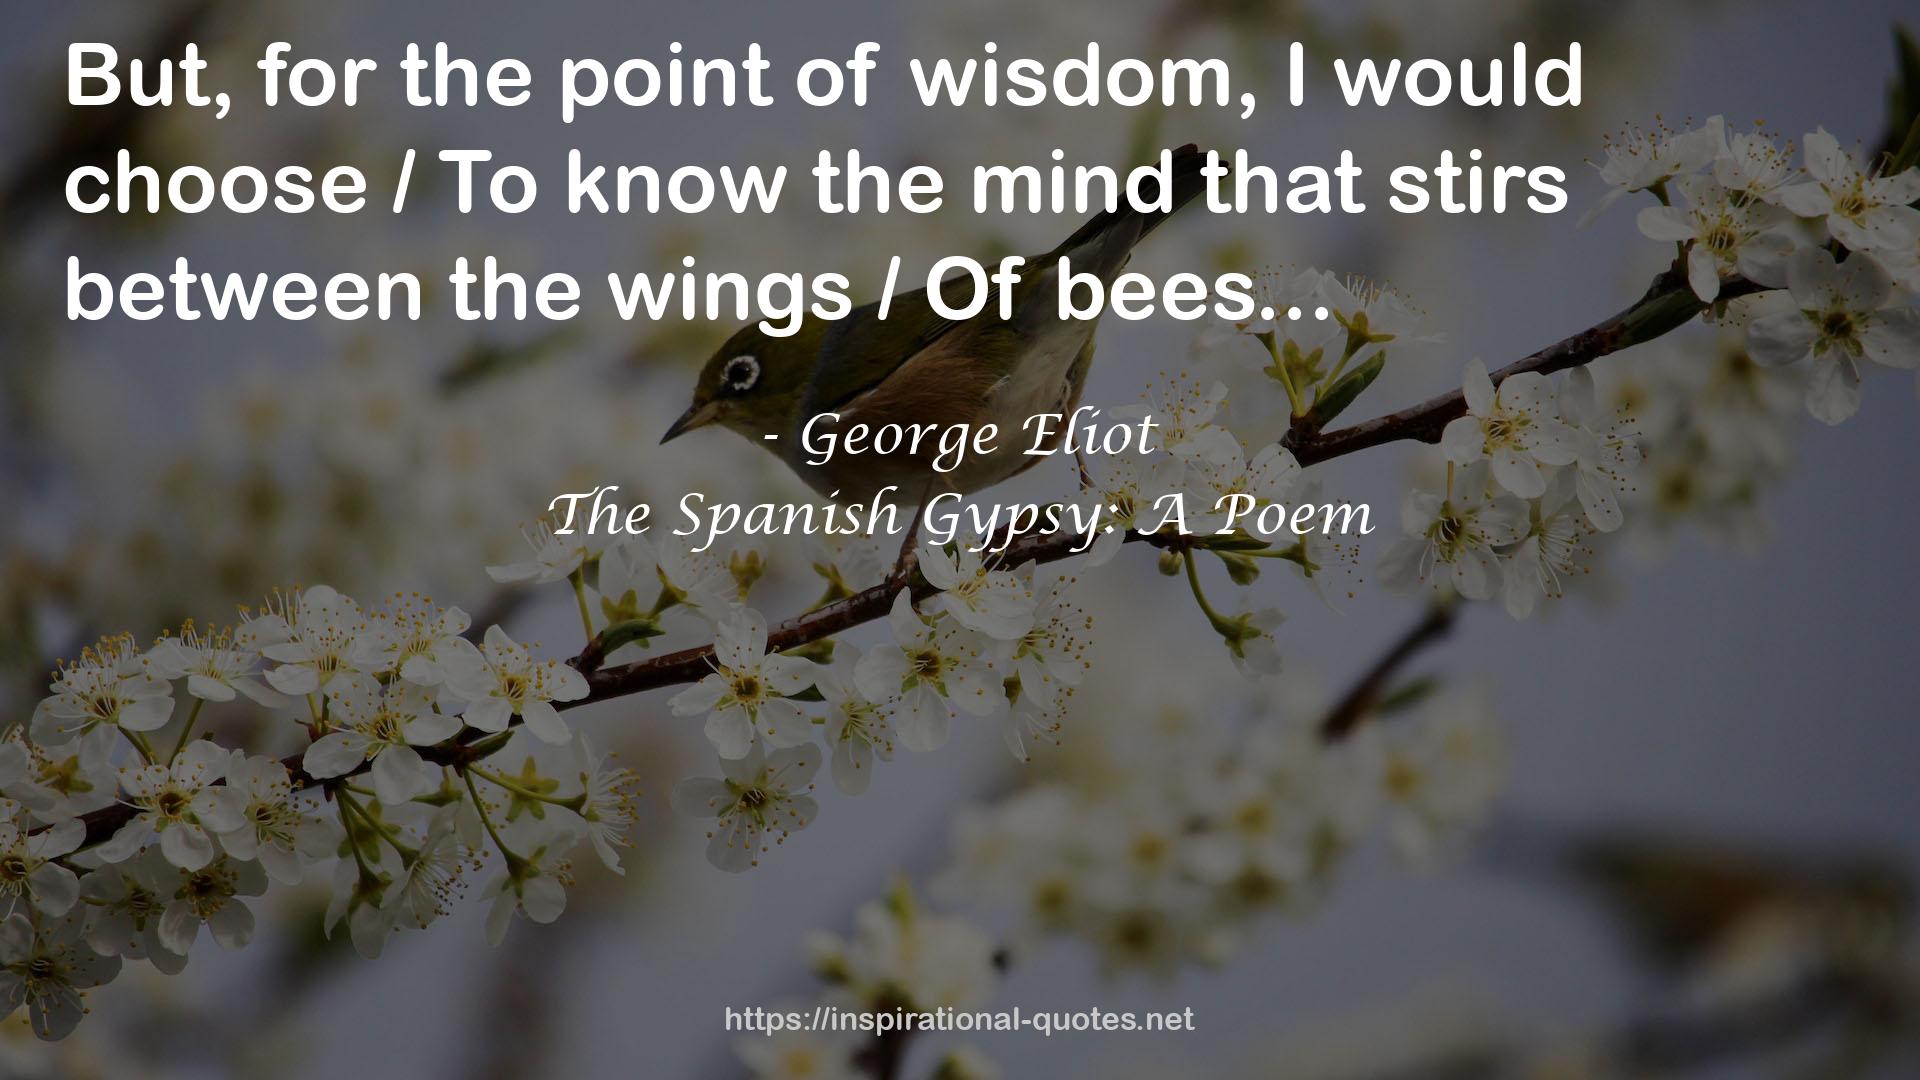 The Spanish Gypsy: A Poem QUOTES